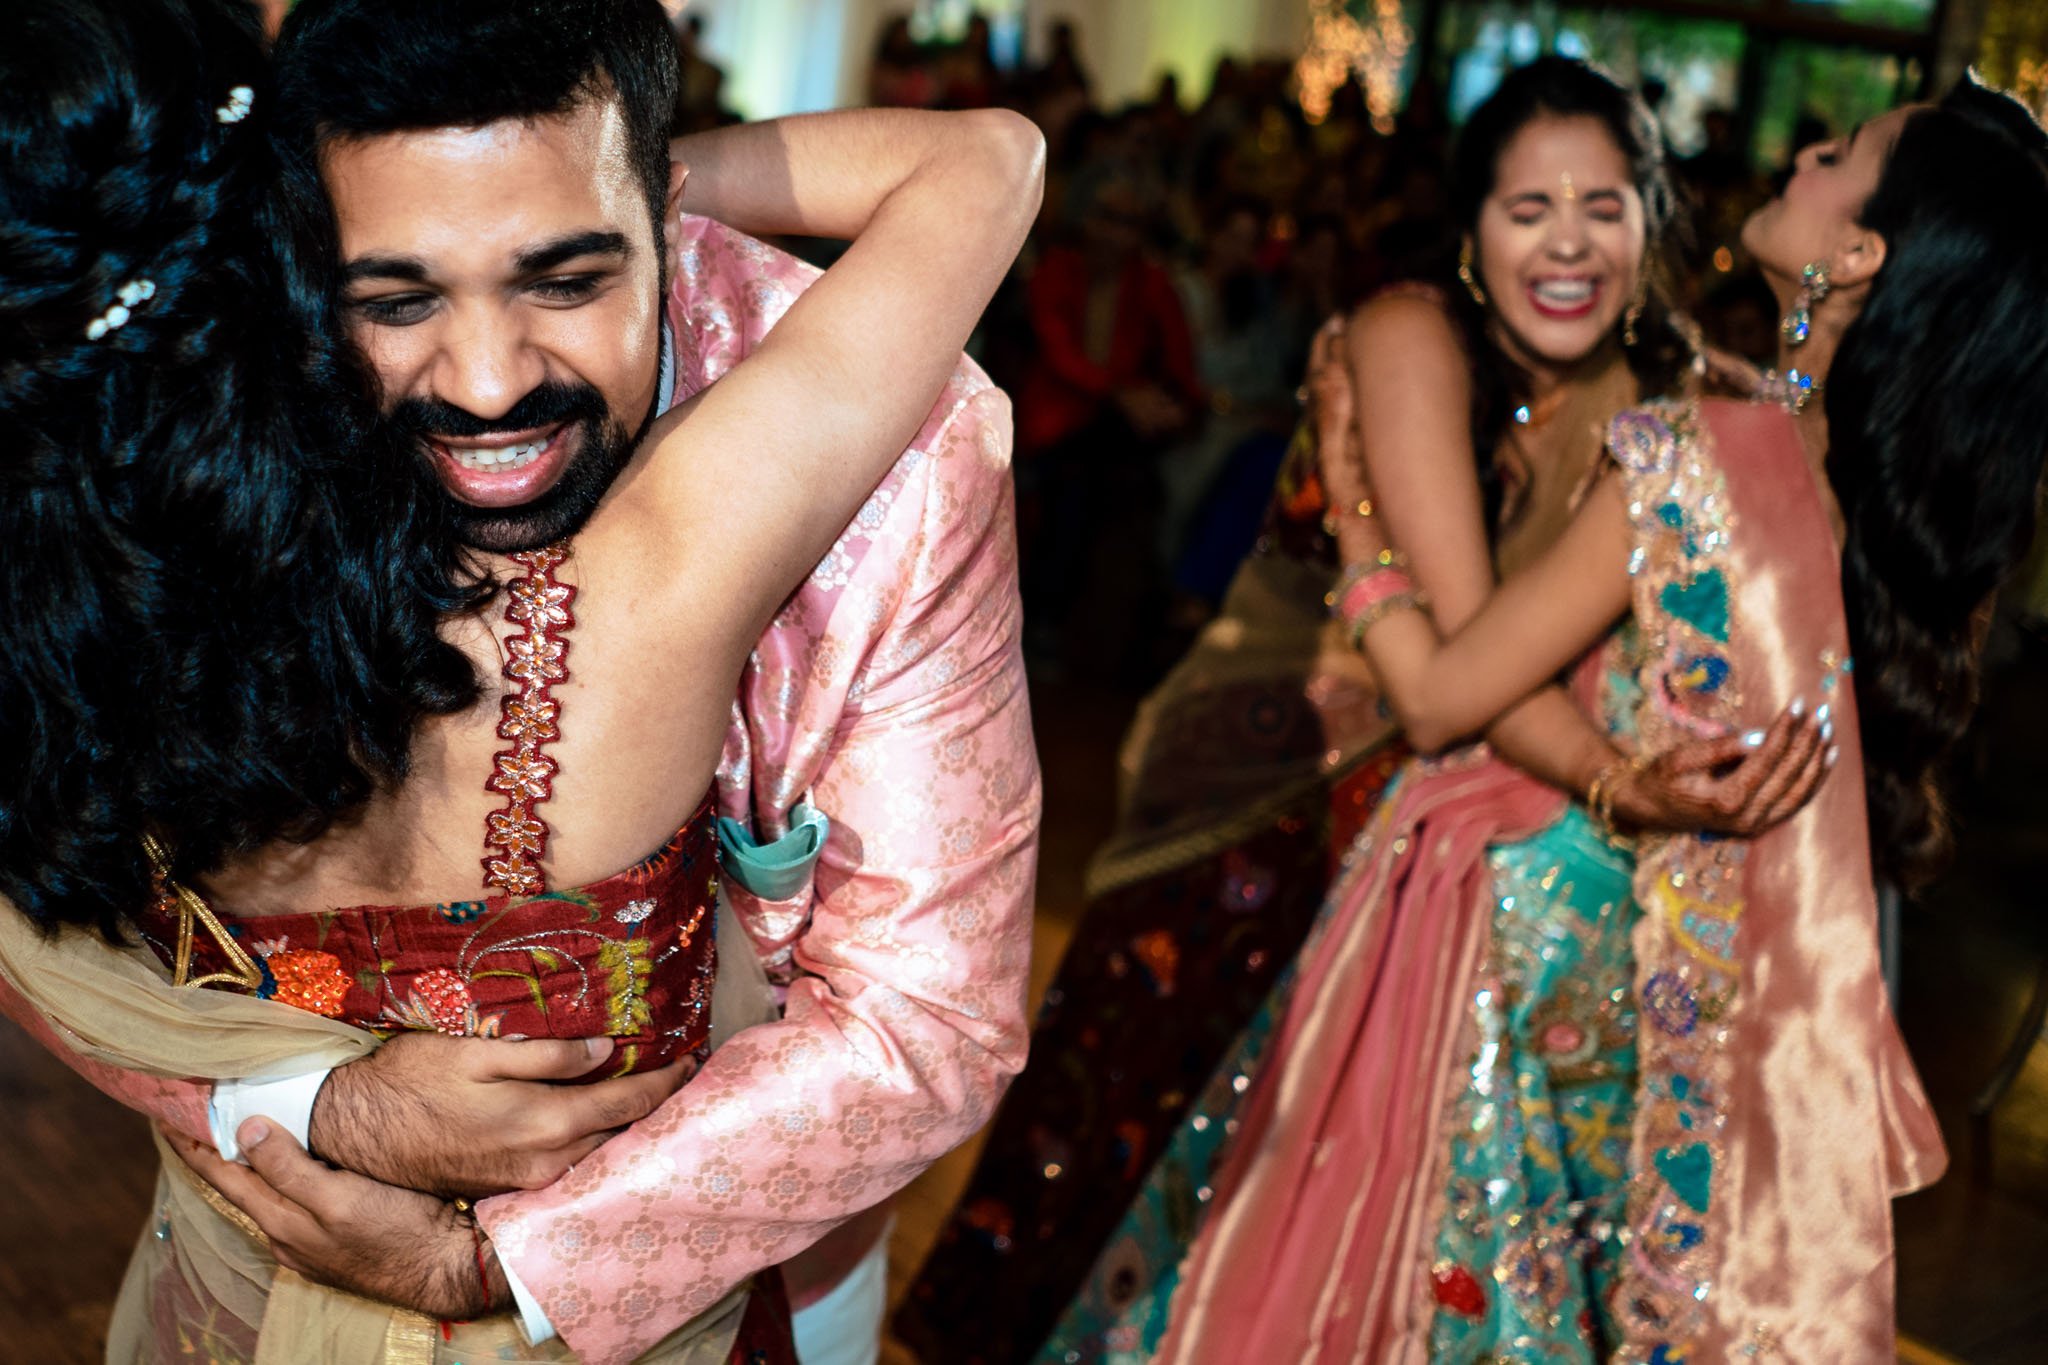 An Indian bride and groom hugging each other at a wedding reception at Biltmore Estate.